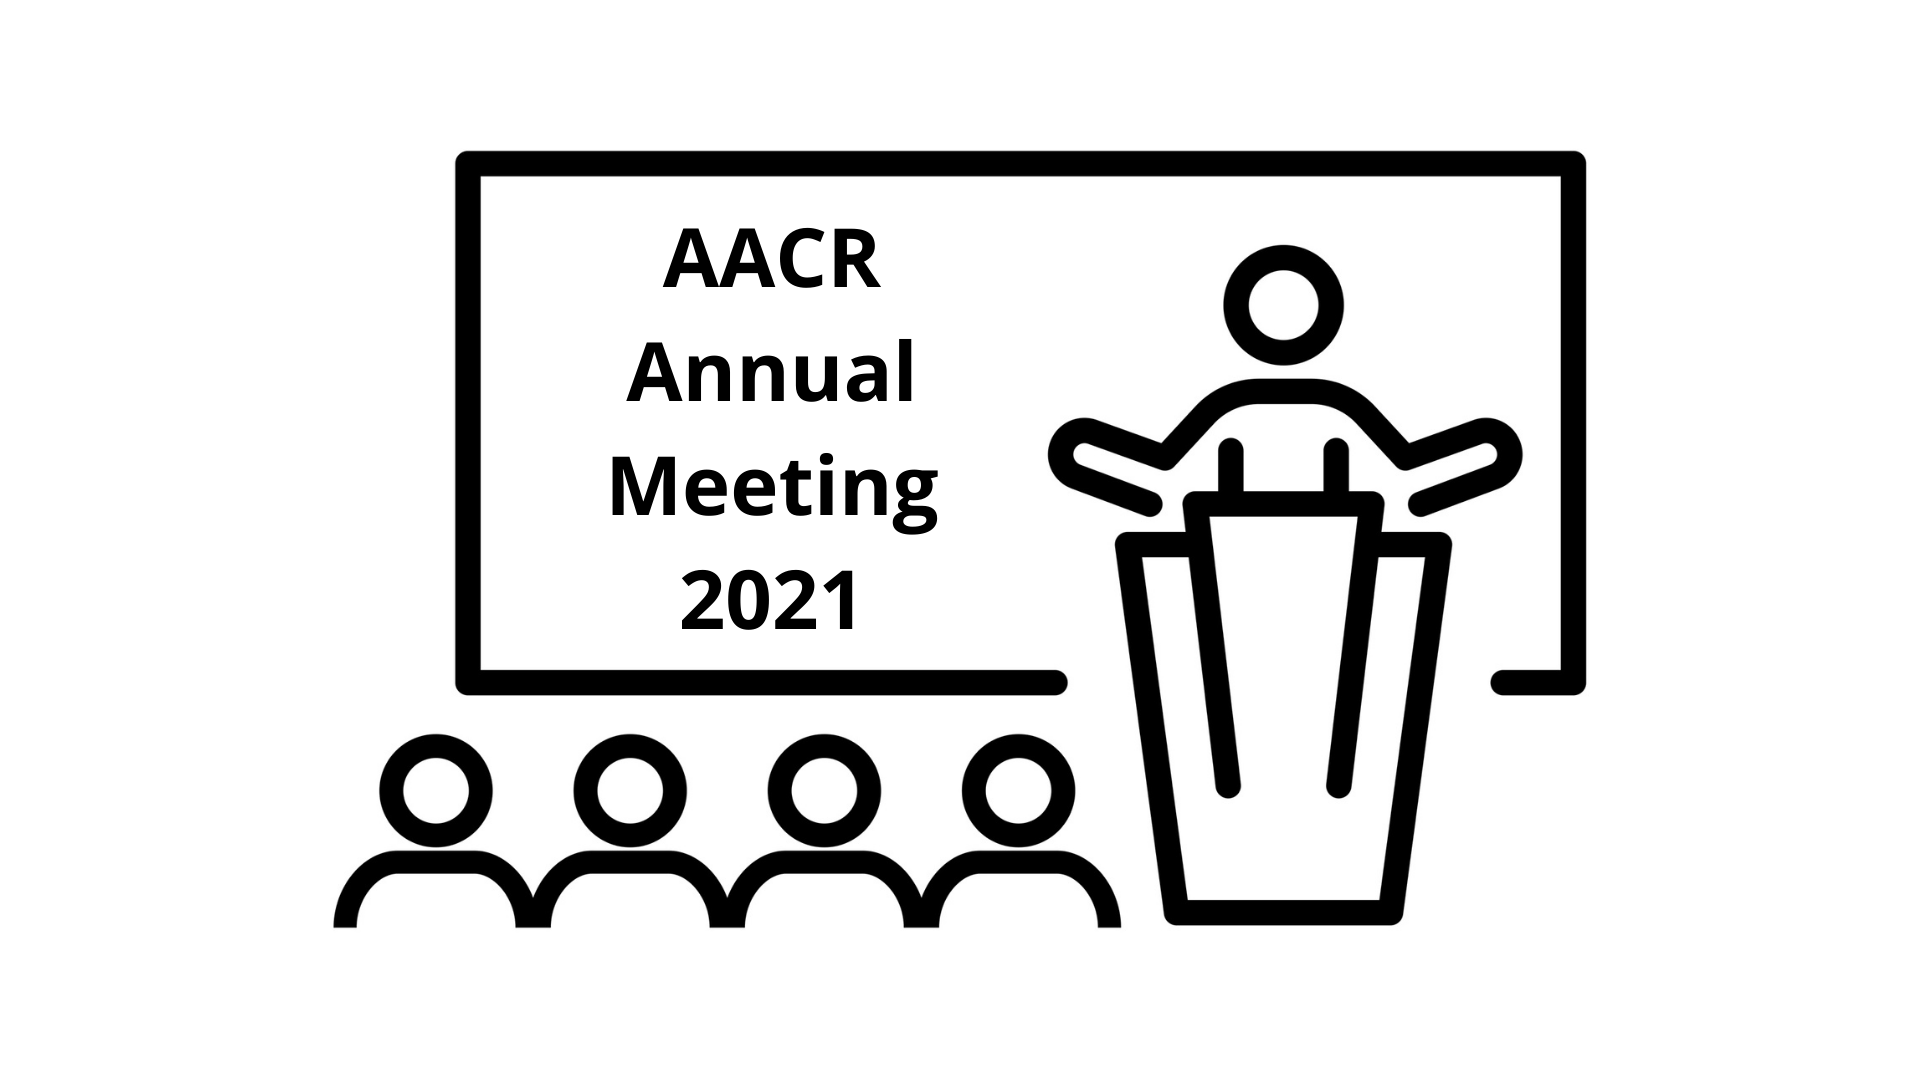 AACR Annual Meeting 2021